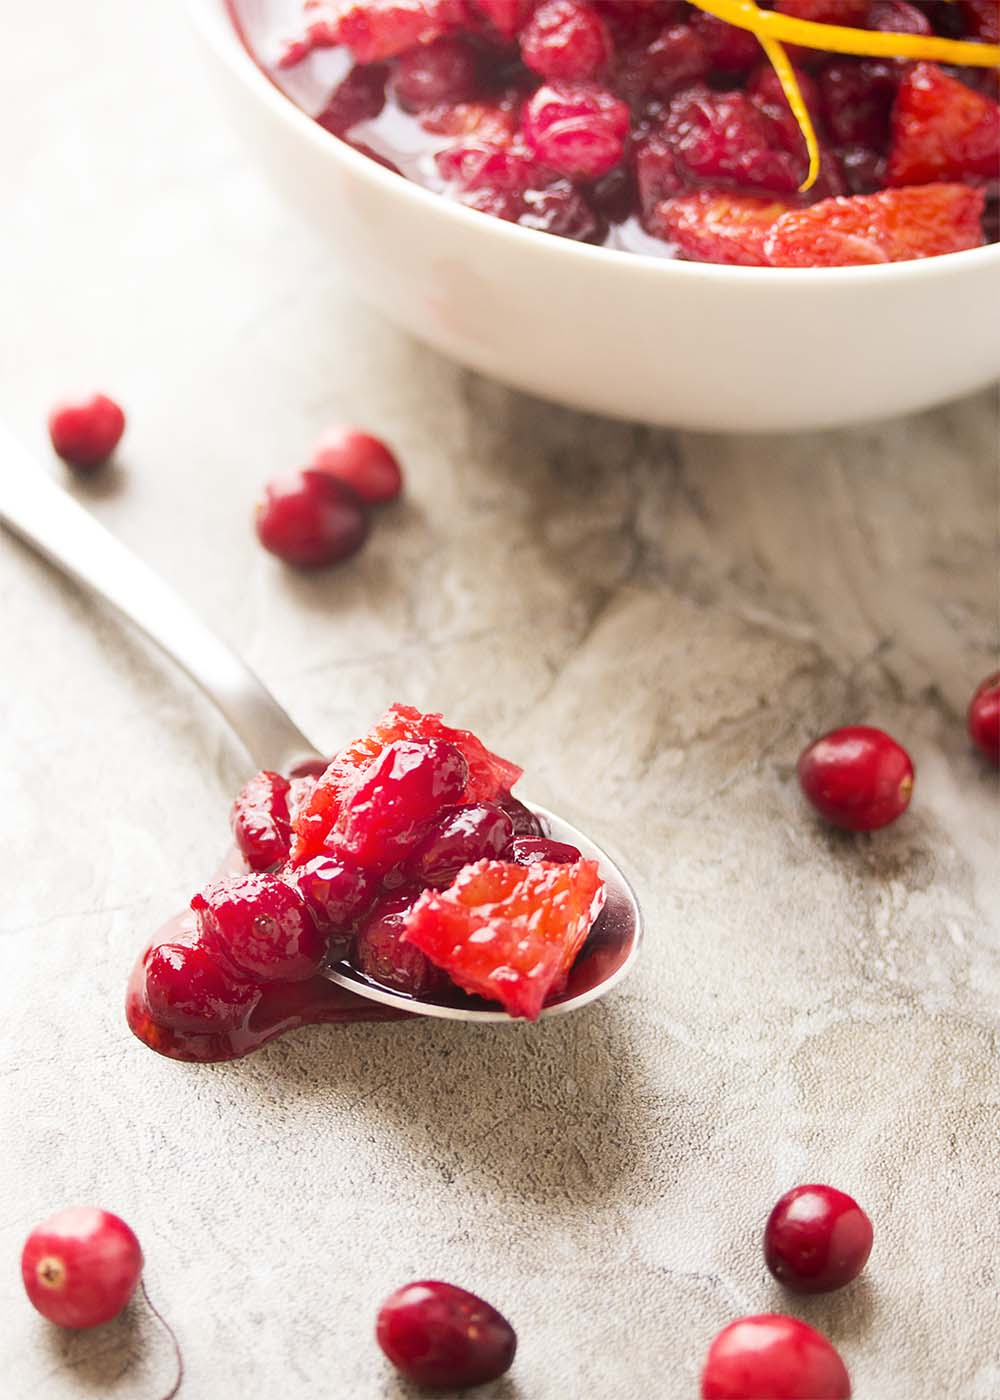 Check out this easy recipe for homemade cranberry sauce! Fresh cranberries are simmered in port wine and mixed with diced oranges to make a great Thanksgiving recipe for Cranberry Port Orange Sauce. | justalittlebitofbacon.com